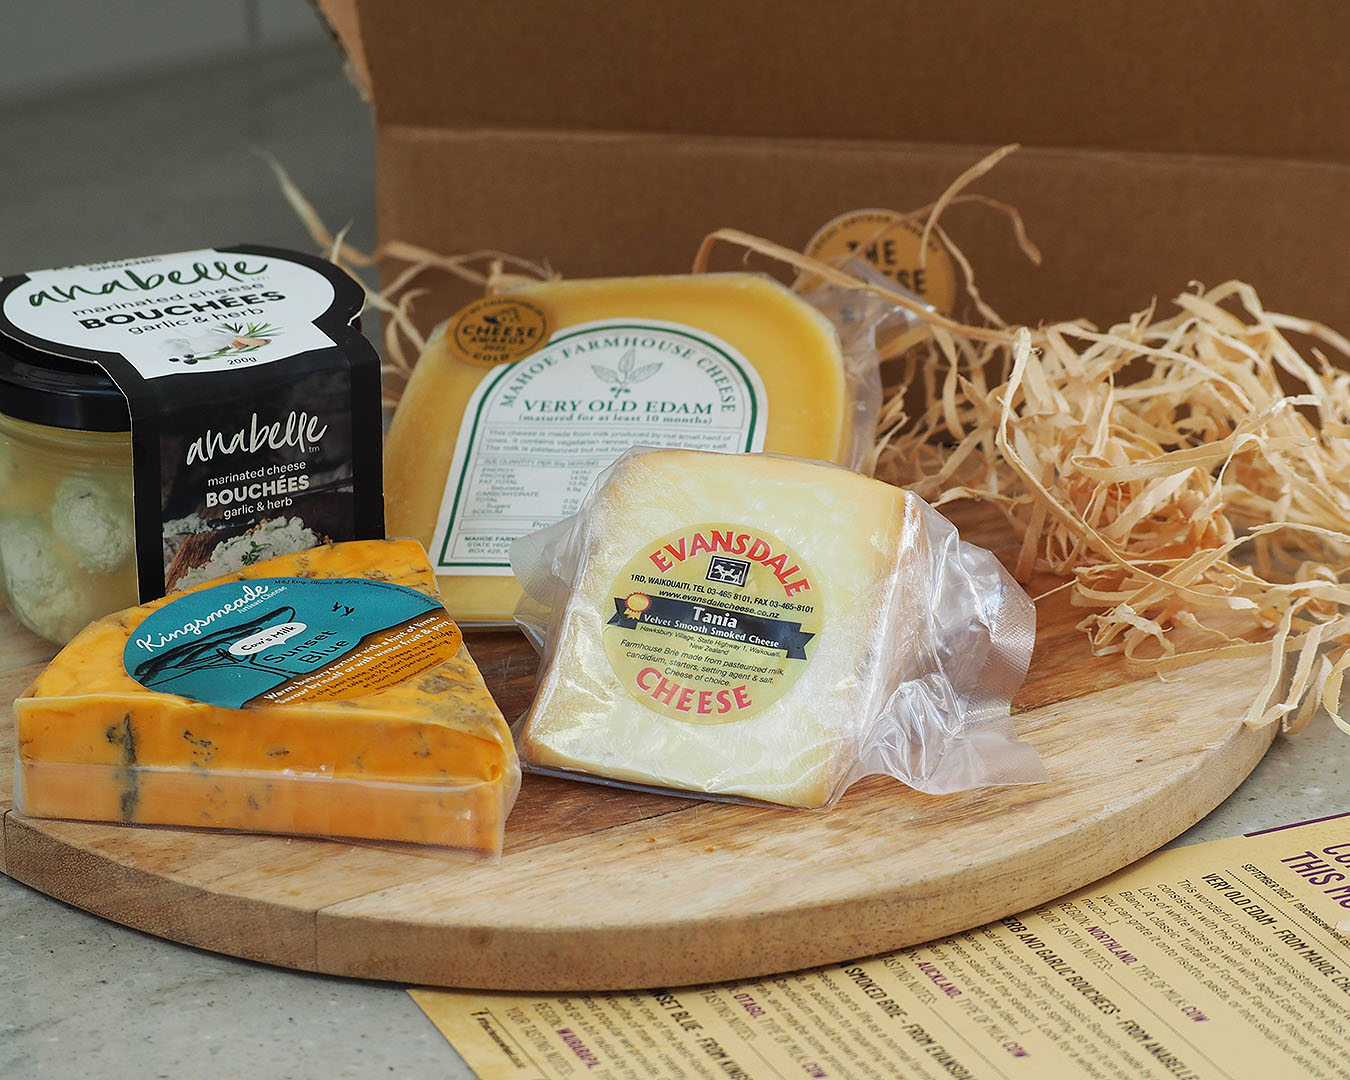 A selection of cheeses from The Cheese Wheel.